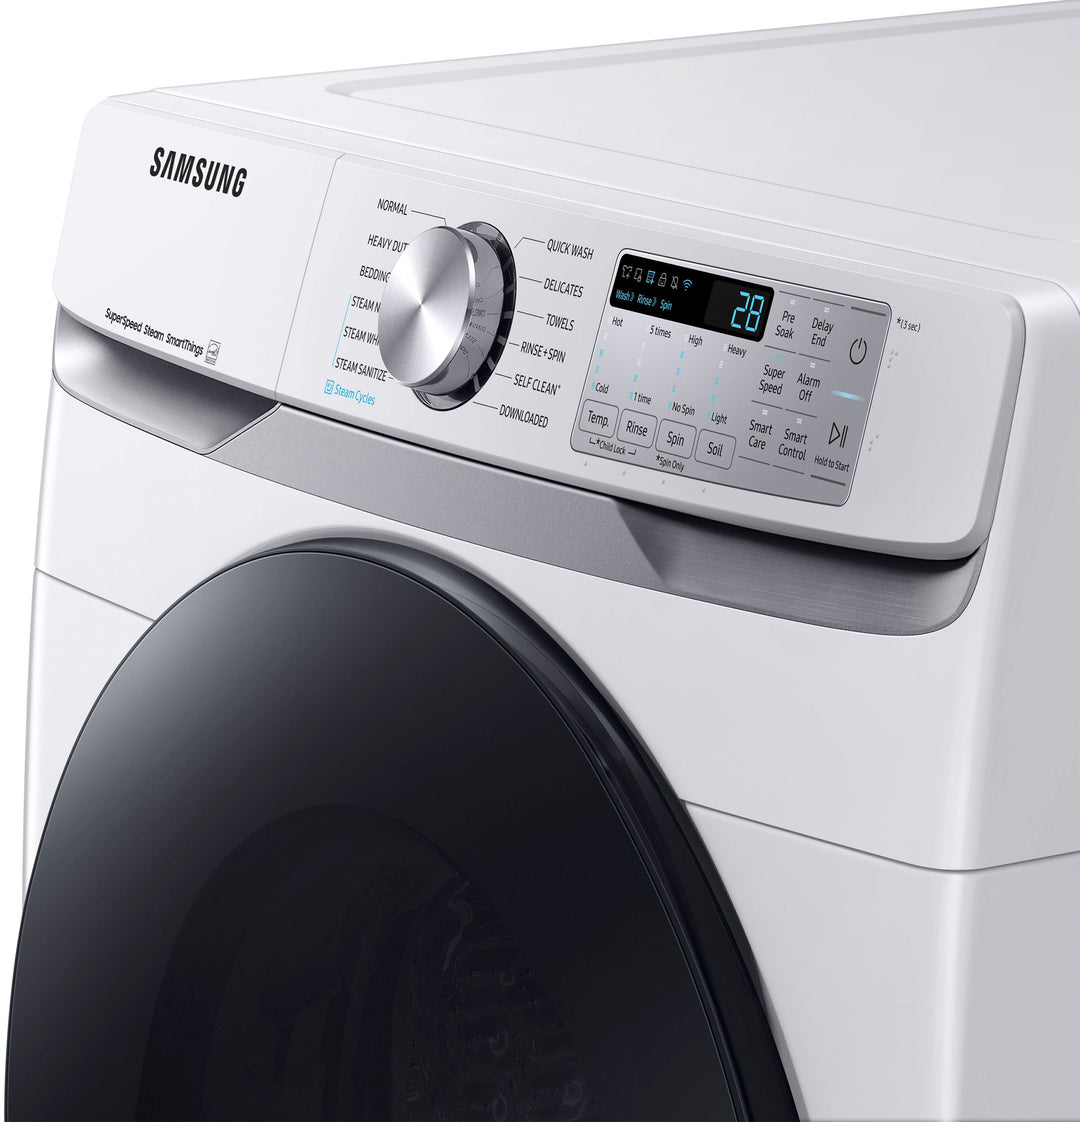 Samsung - 4.5 cu. ft. Large Capacity Smart Front Load Washer with Super Speed Wash - White_8